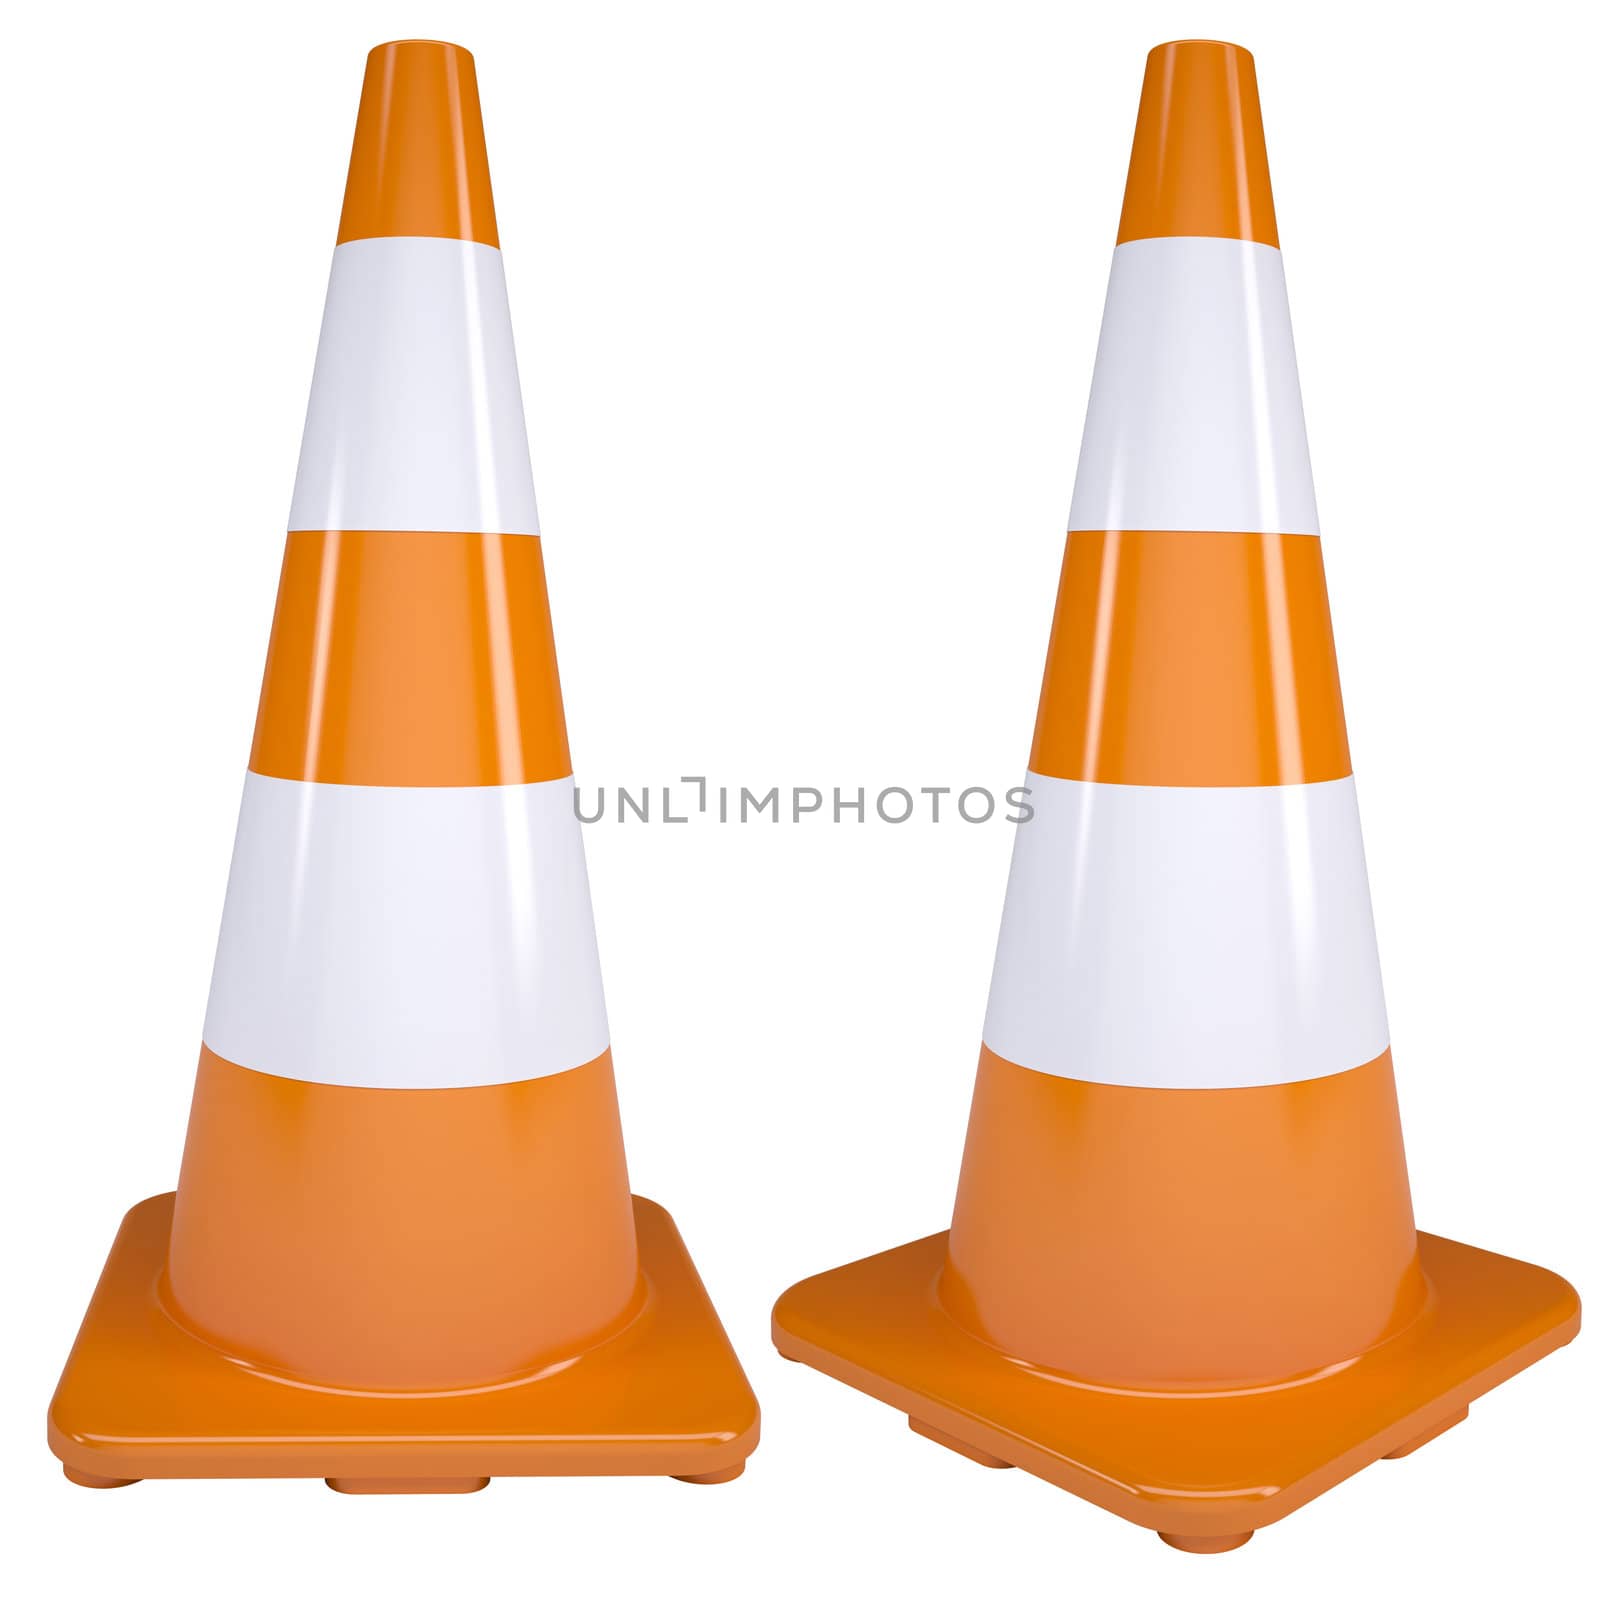 Traffic cone. Isolated render on white background